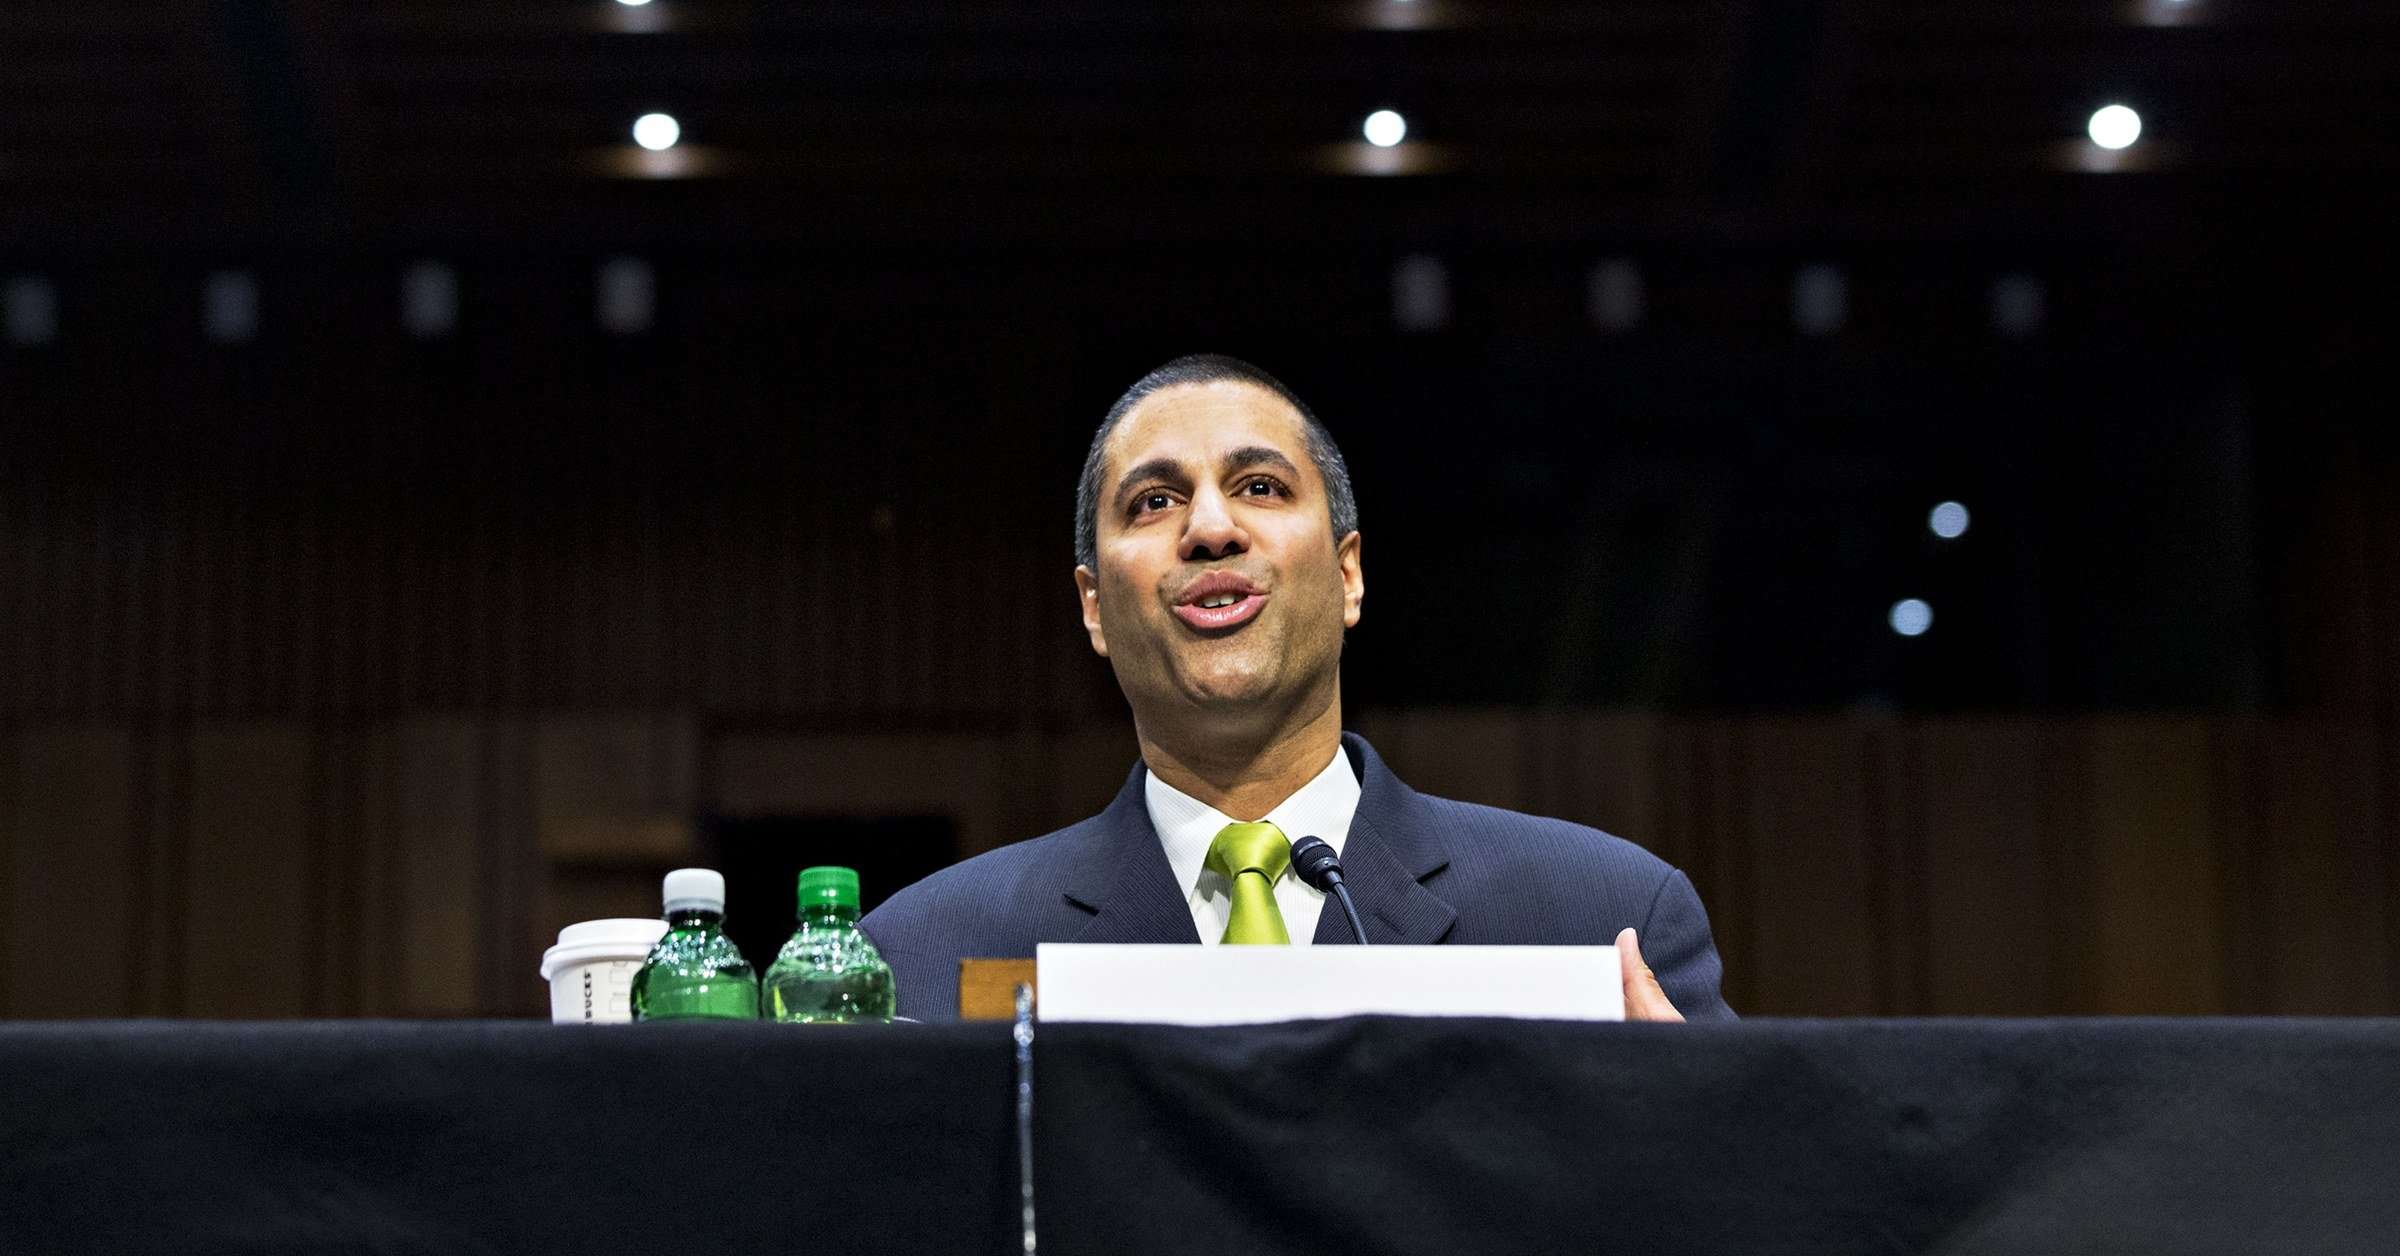 image for The FCC Wants to Kill Net Neutrality. But Congress Will Pay the Price